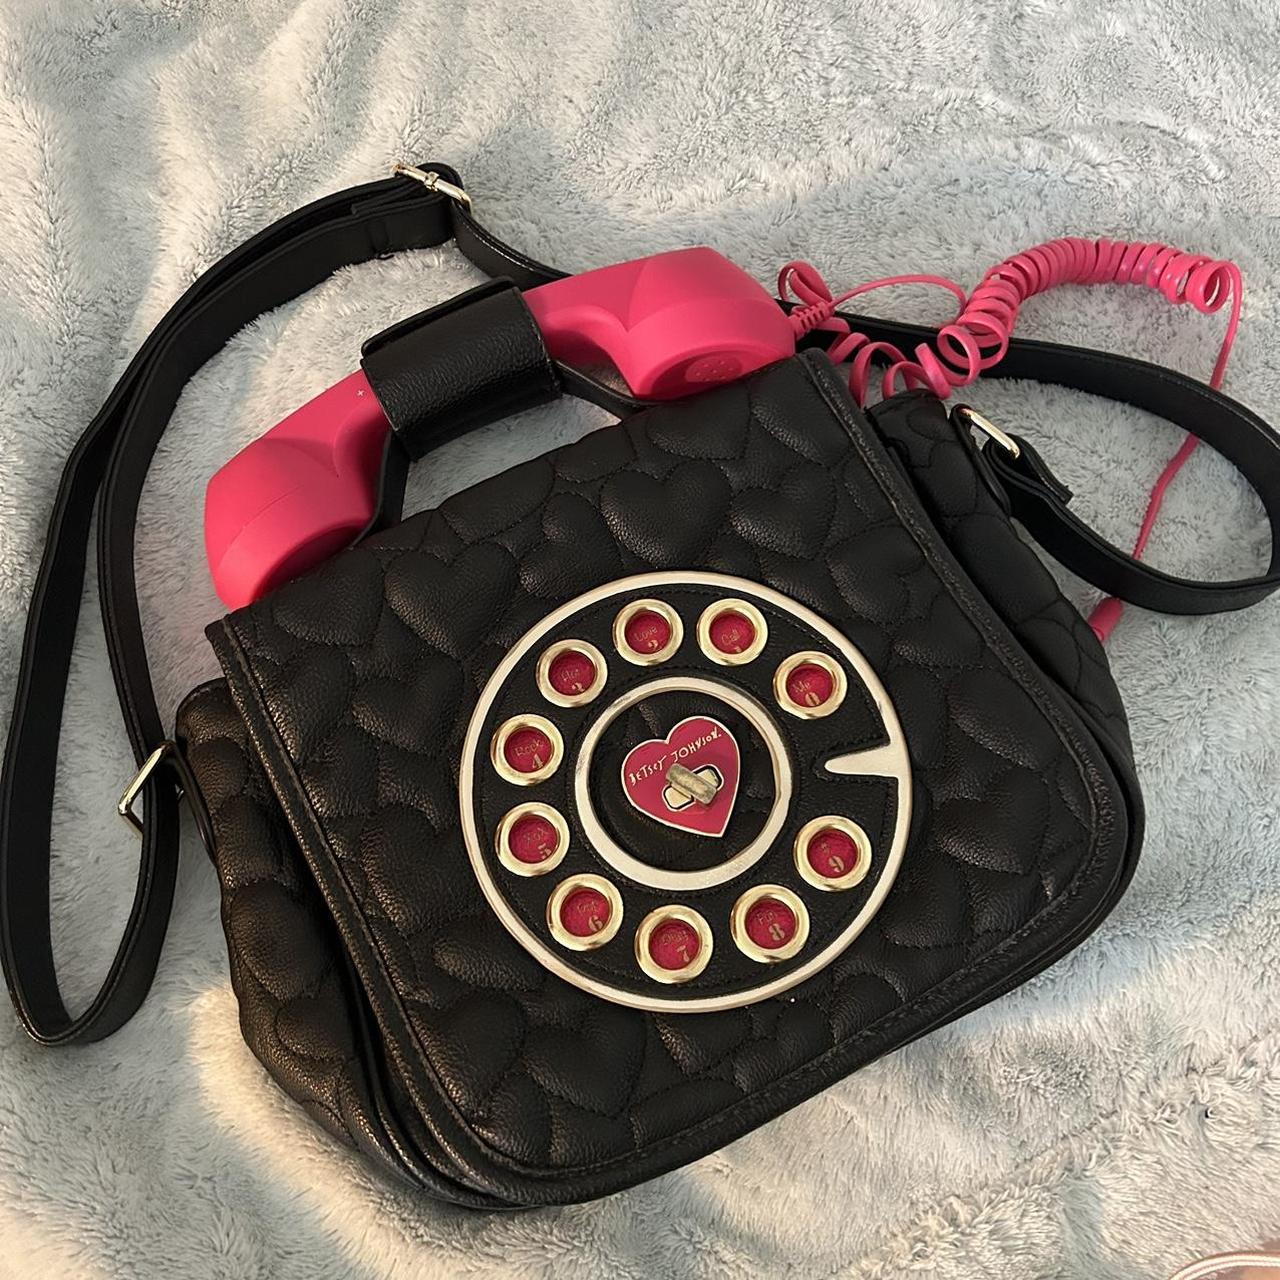 Iconic Betsey johnson phone bag📞 Perfect condition ,... - Depop